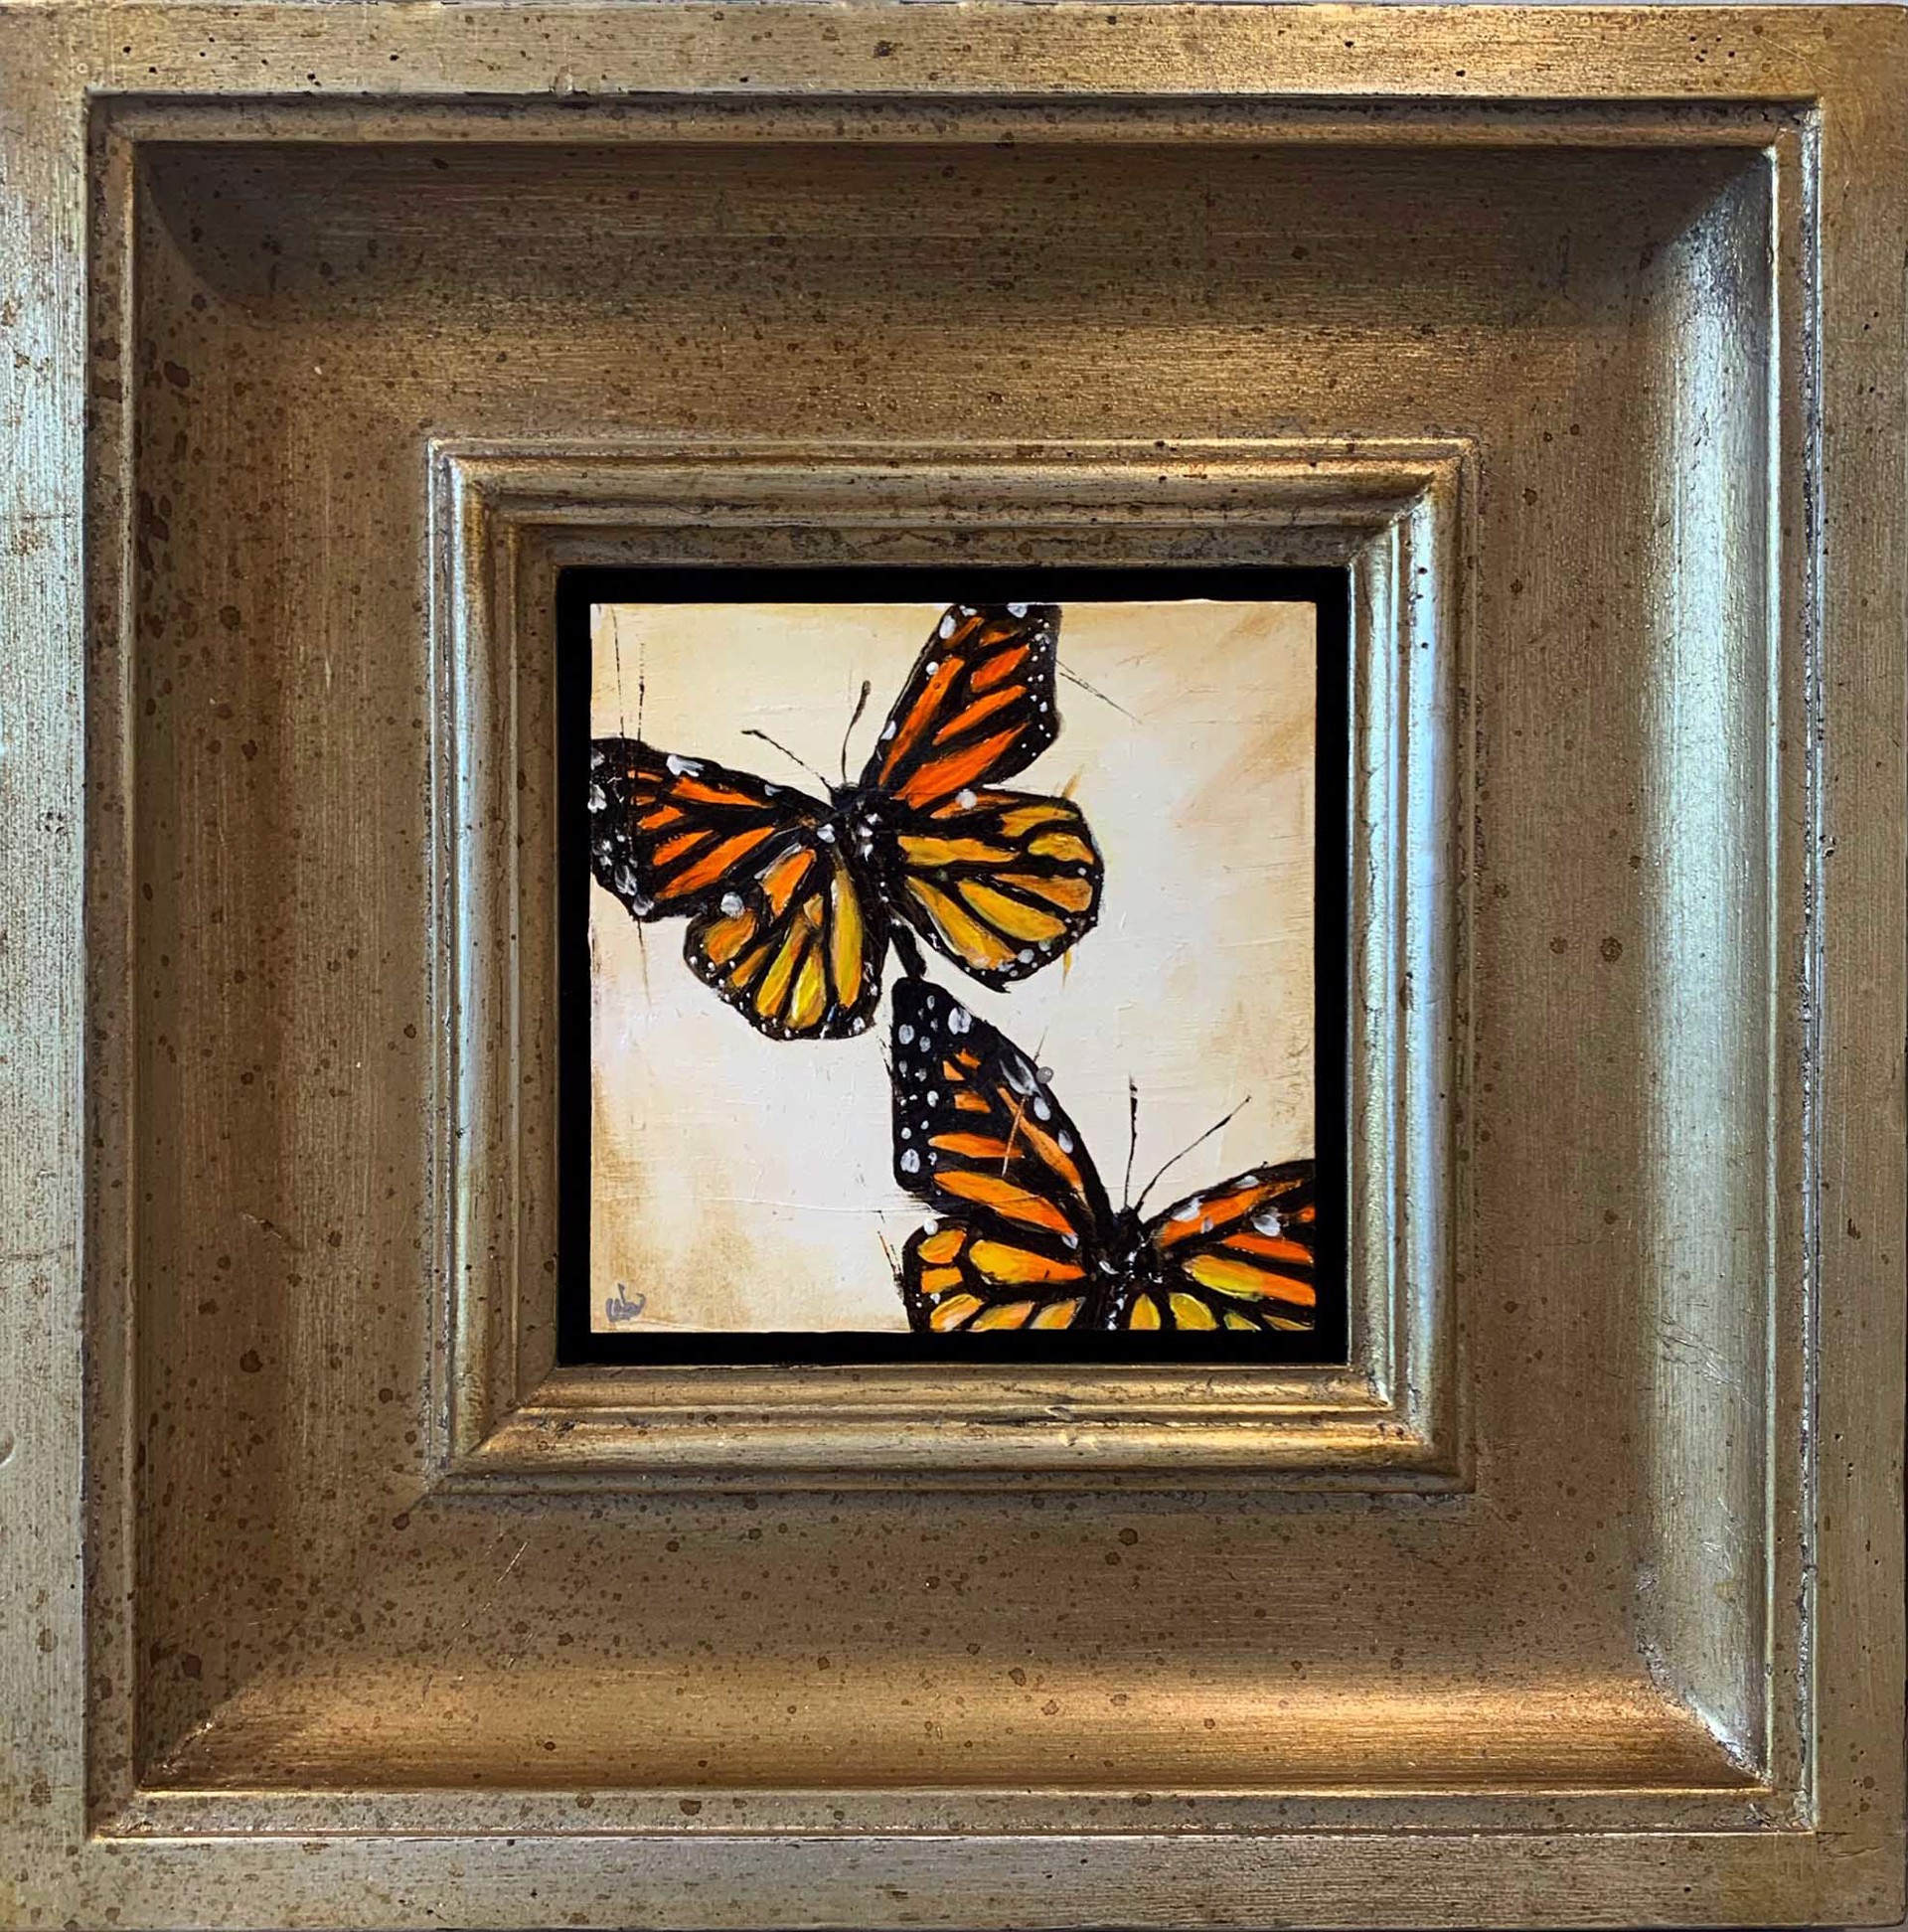 Oil Painting Of Two Monarch Butterflies On A Light Background With A Gold Frame, By Jenna Von Benedikt